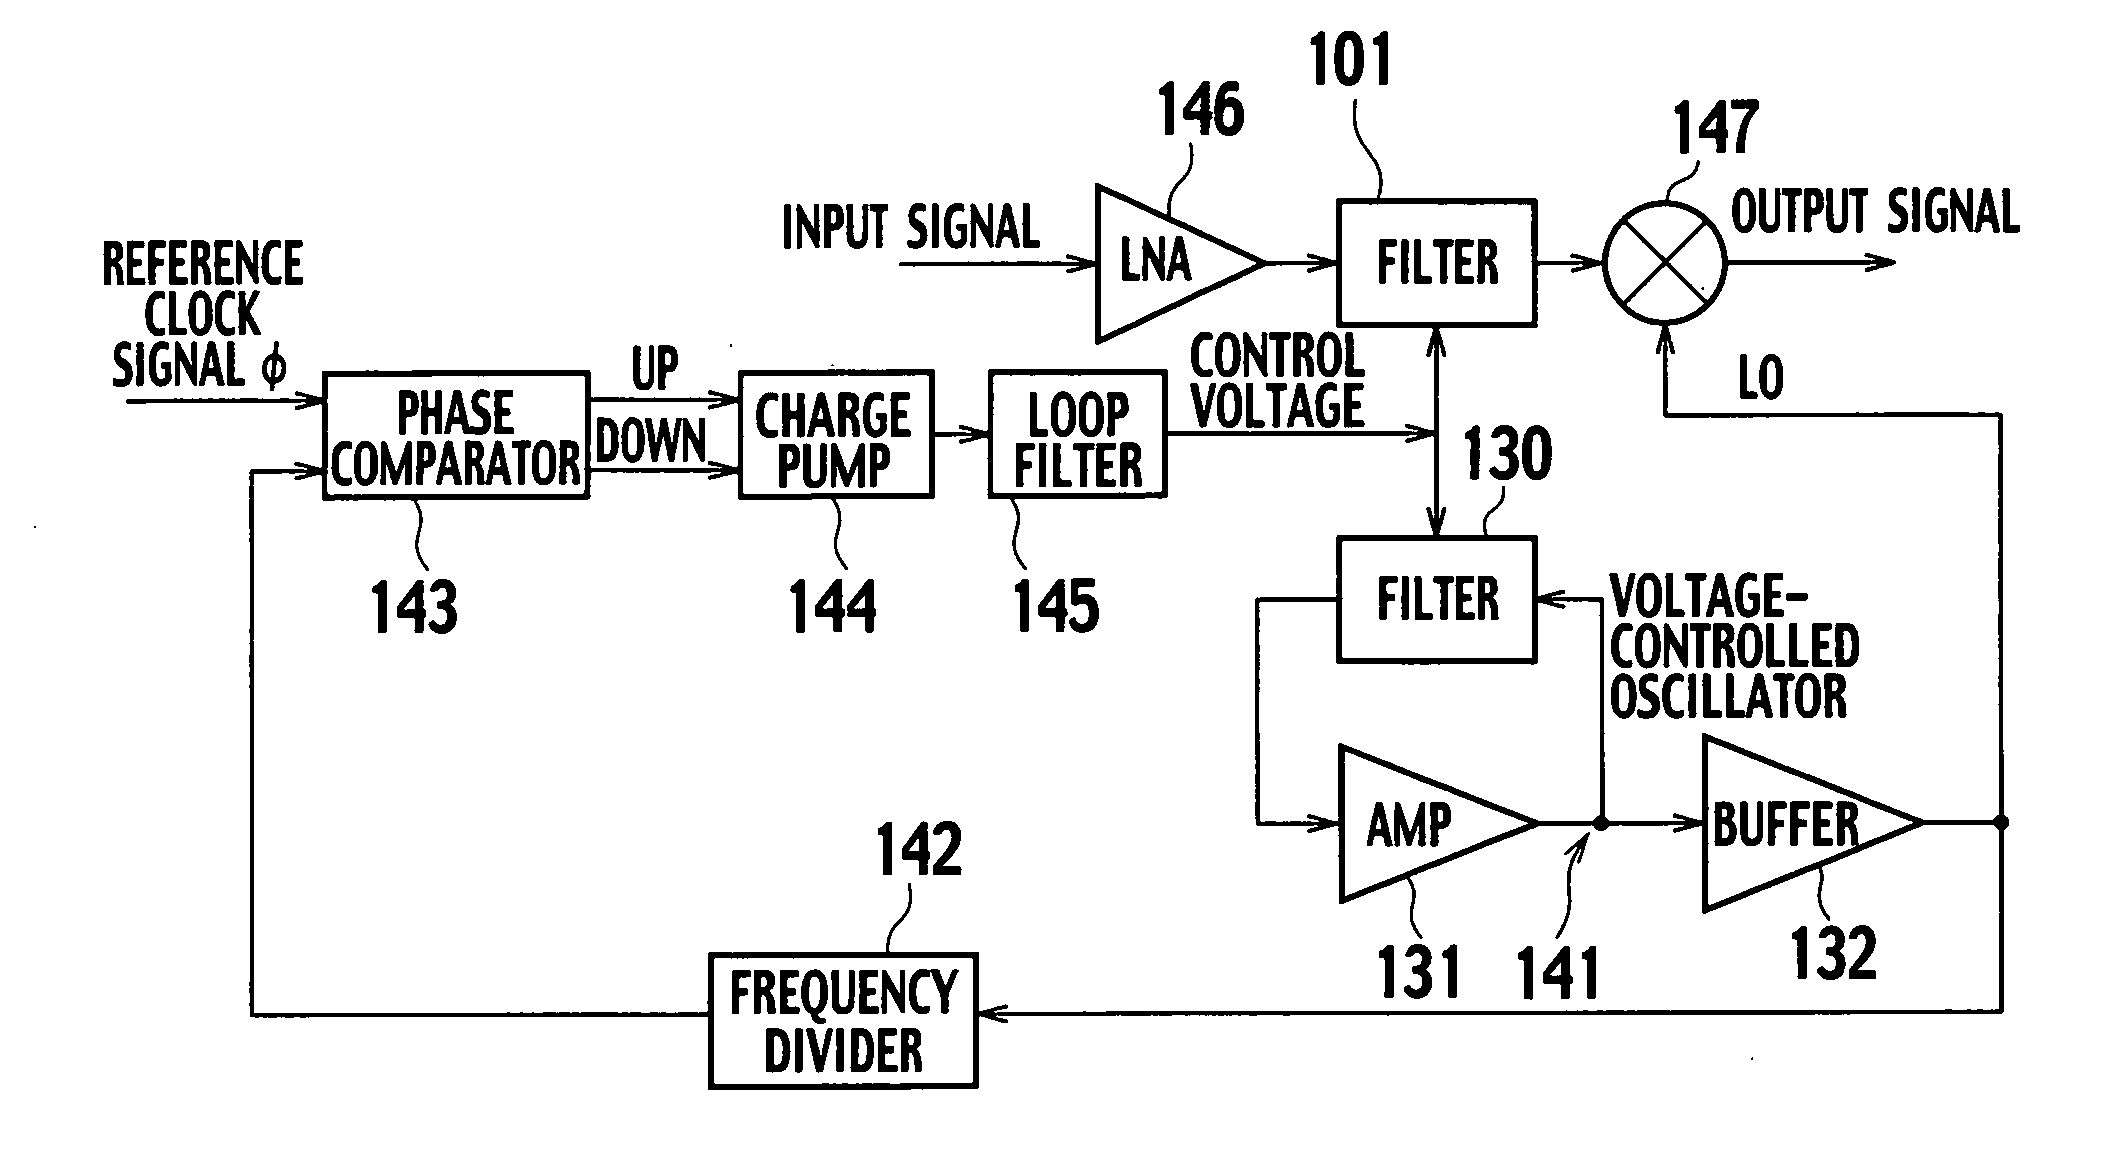 Micro-mechanical device, micro-switch, variable capacitor high frequency circuit and optical switch